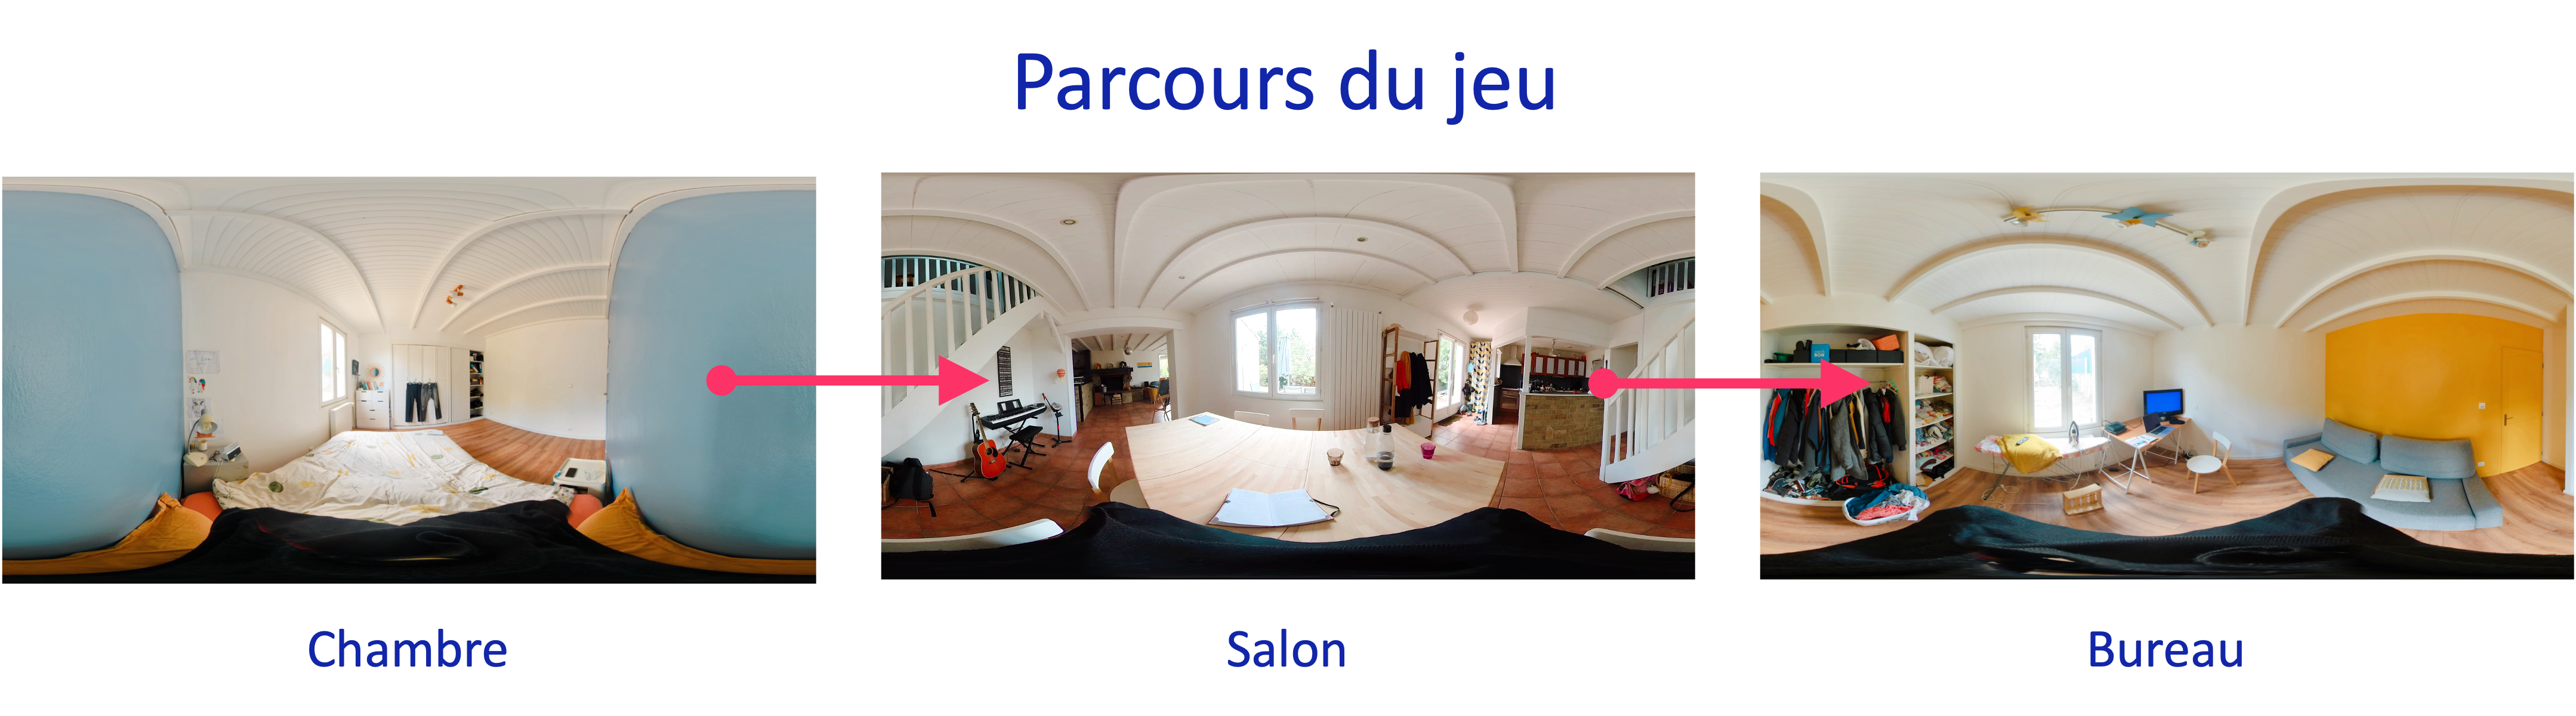 Parcours serious game en immersive learning